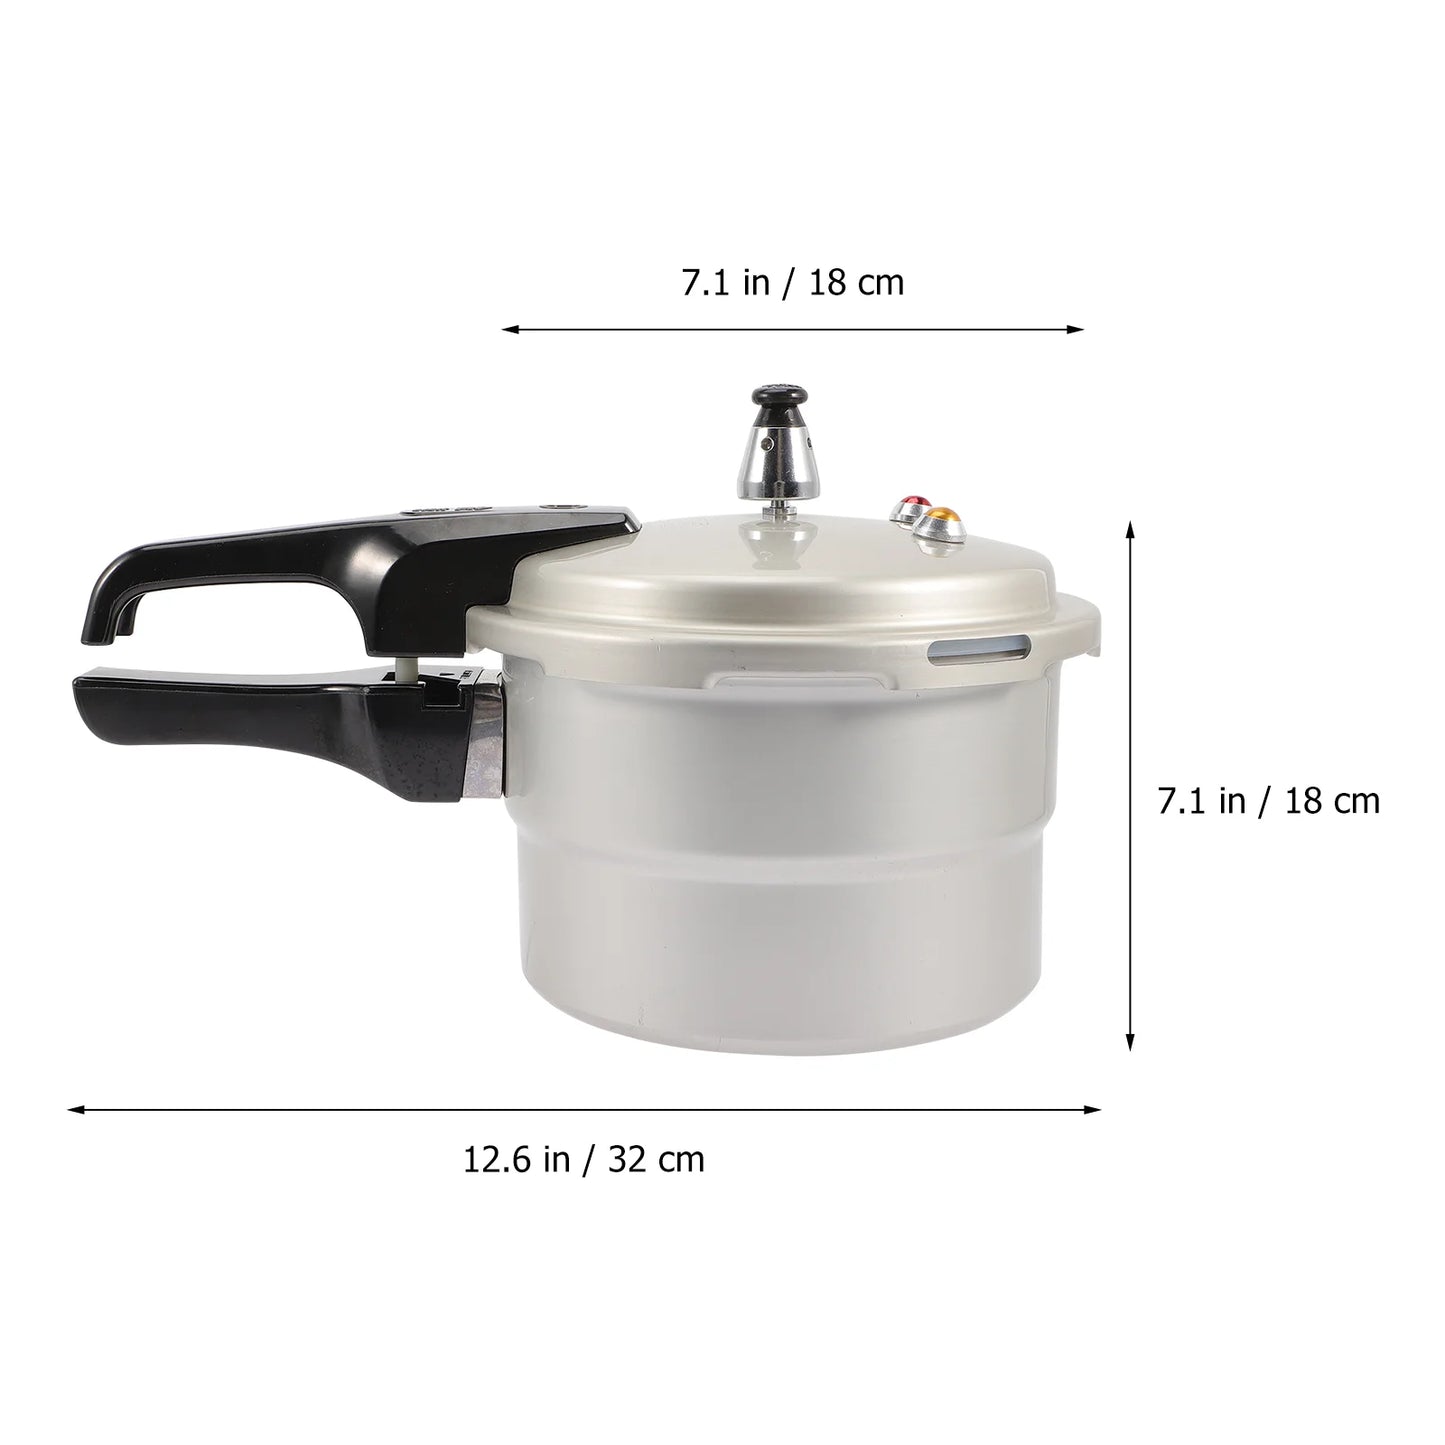 Aluminum Pressure Cooker 10 Quart 
3L Small Cooking Pot 
Gas Steamer 
Electric Stove Safety Induction Cooktops 
Canner